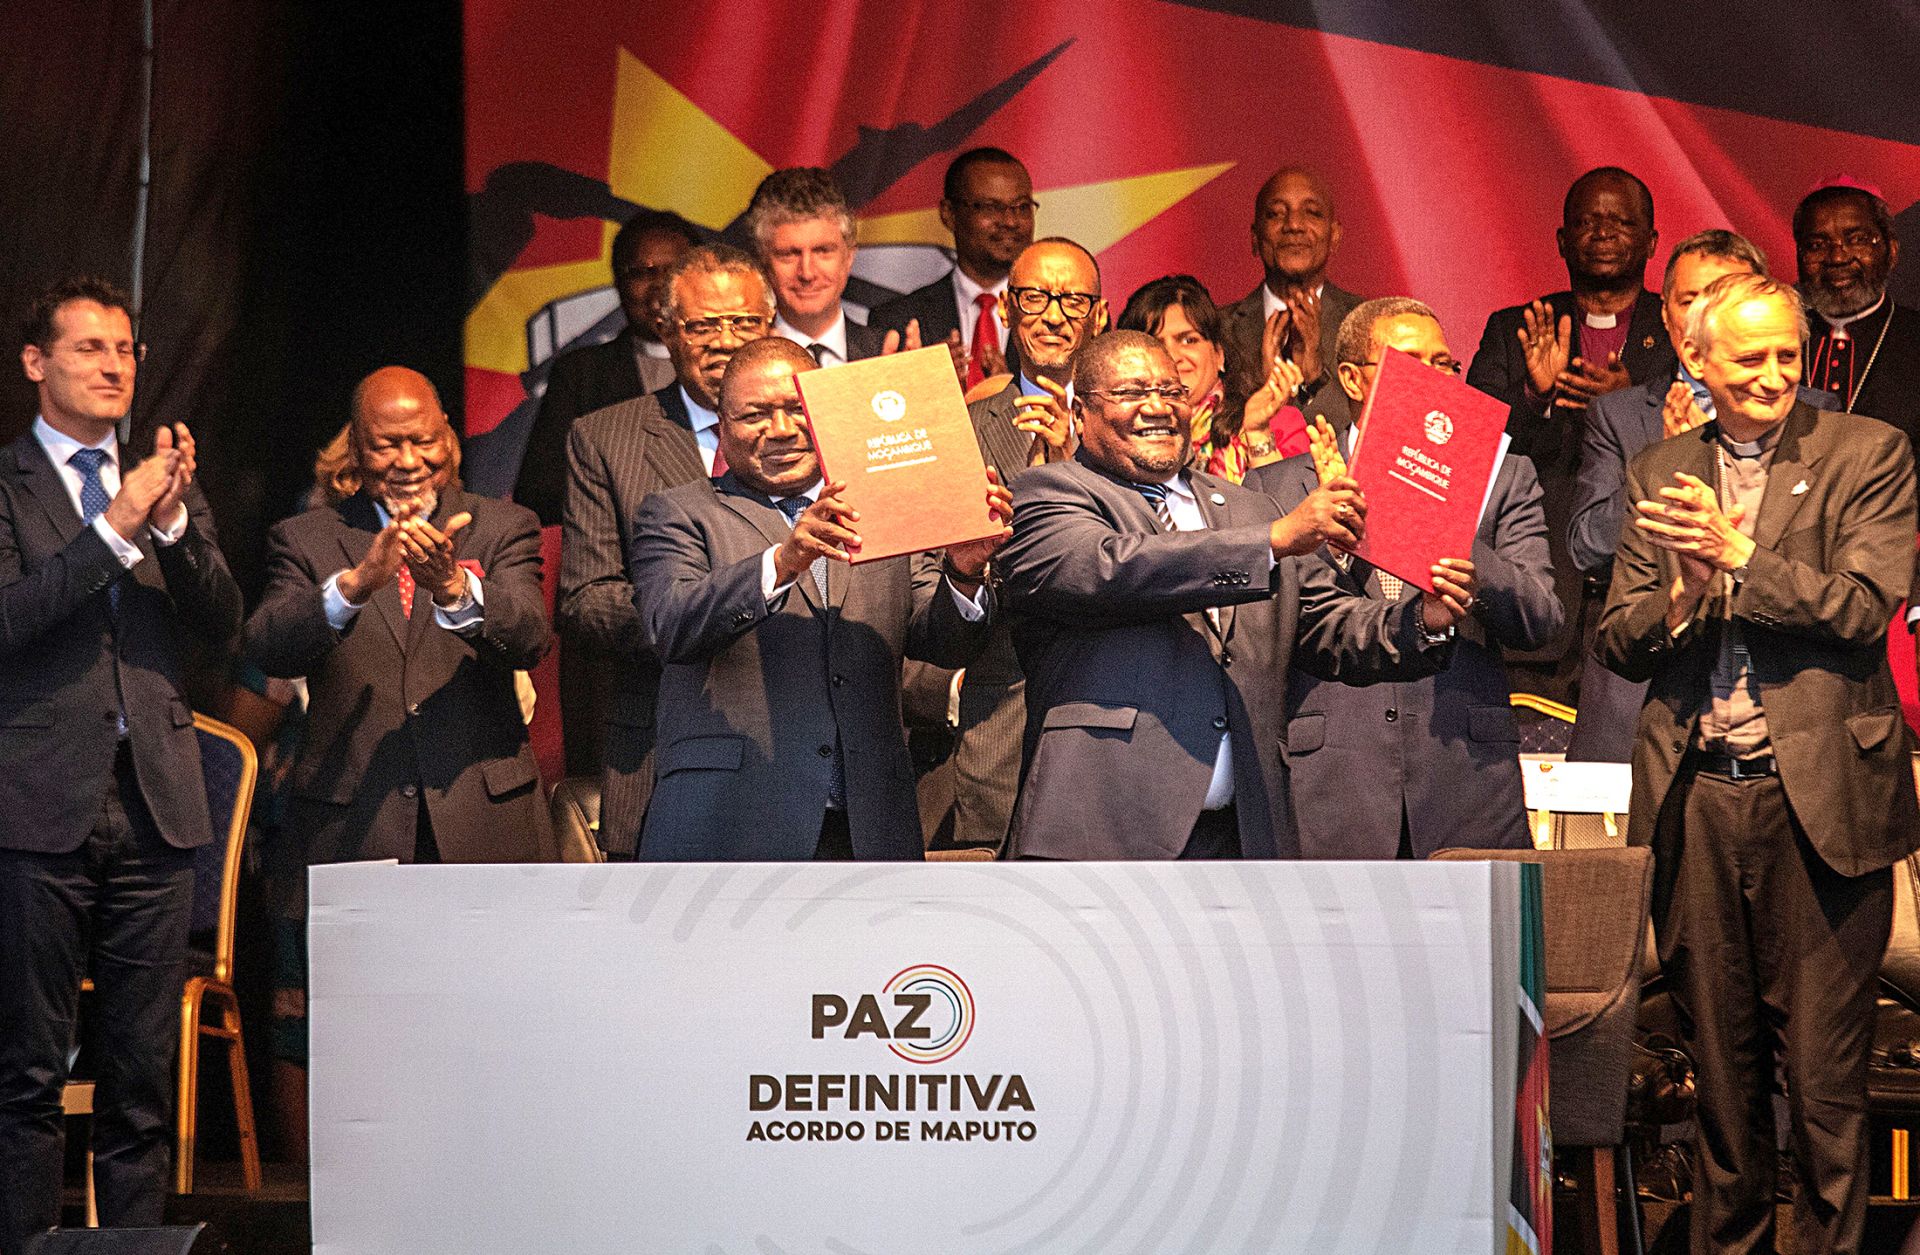 Mozambican President Filipe Nyusi (left) and Mozambican National Resistance leader Ossufo Momade display the cease-fire agreement they signed in Maputo on Aug. 6, 2019.